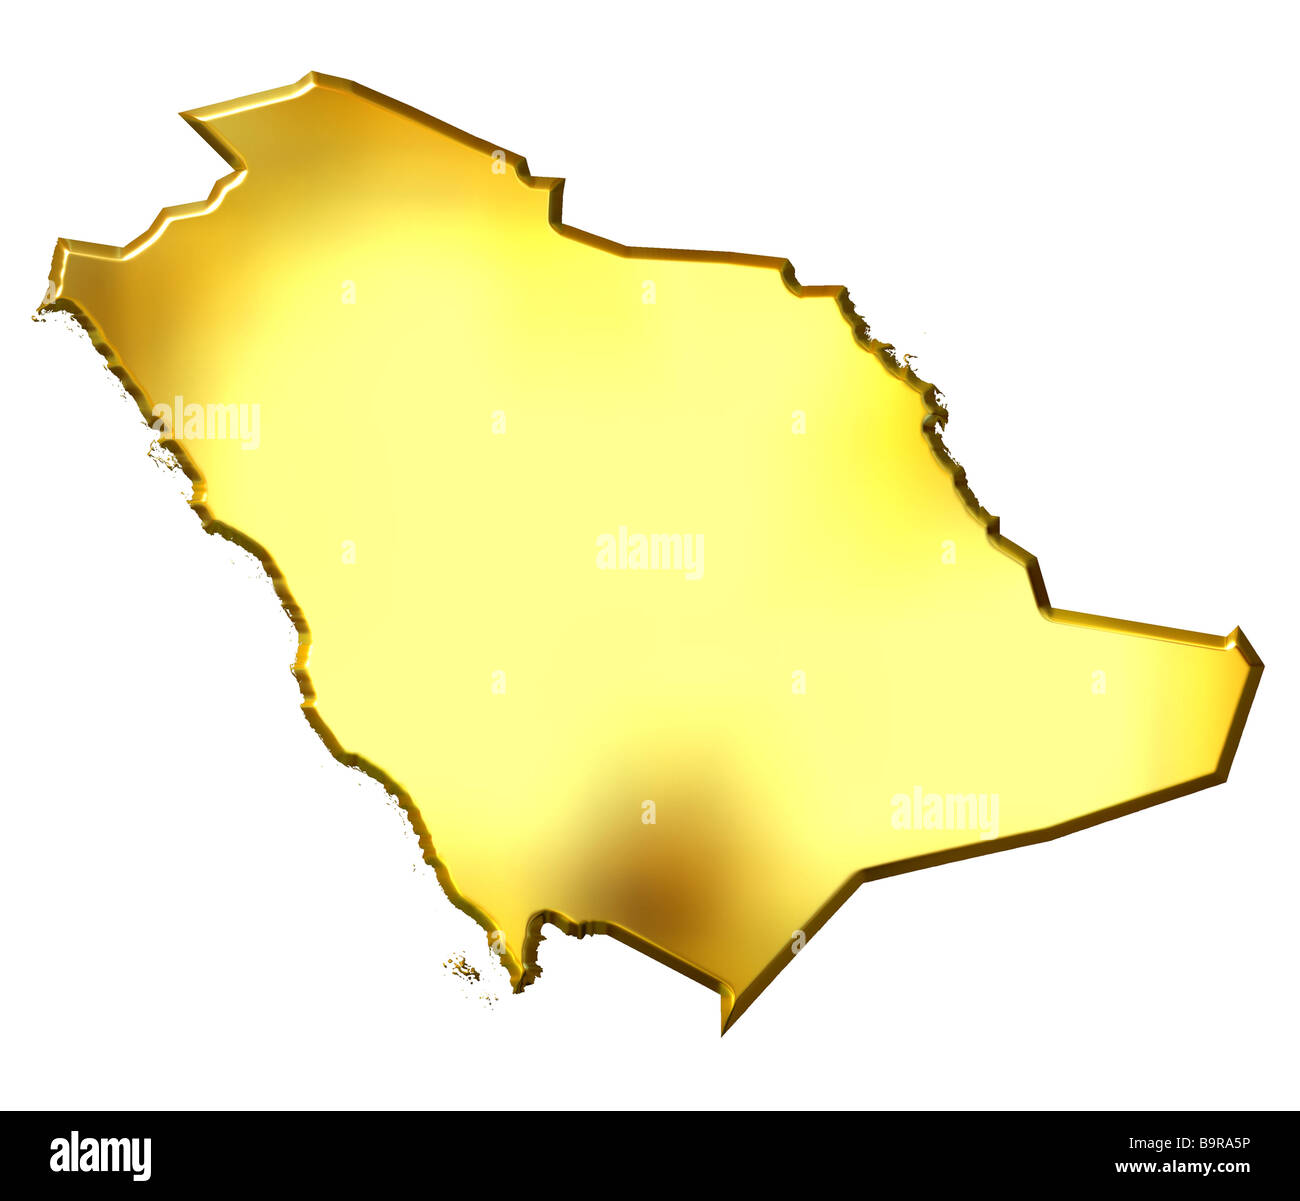 Saudi Arabia 3d golden map isolated in white Stock Photo - Alamy